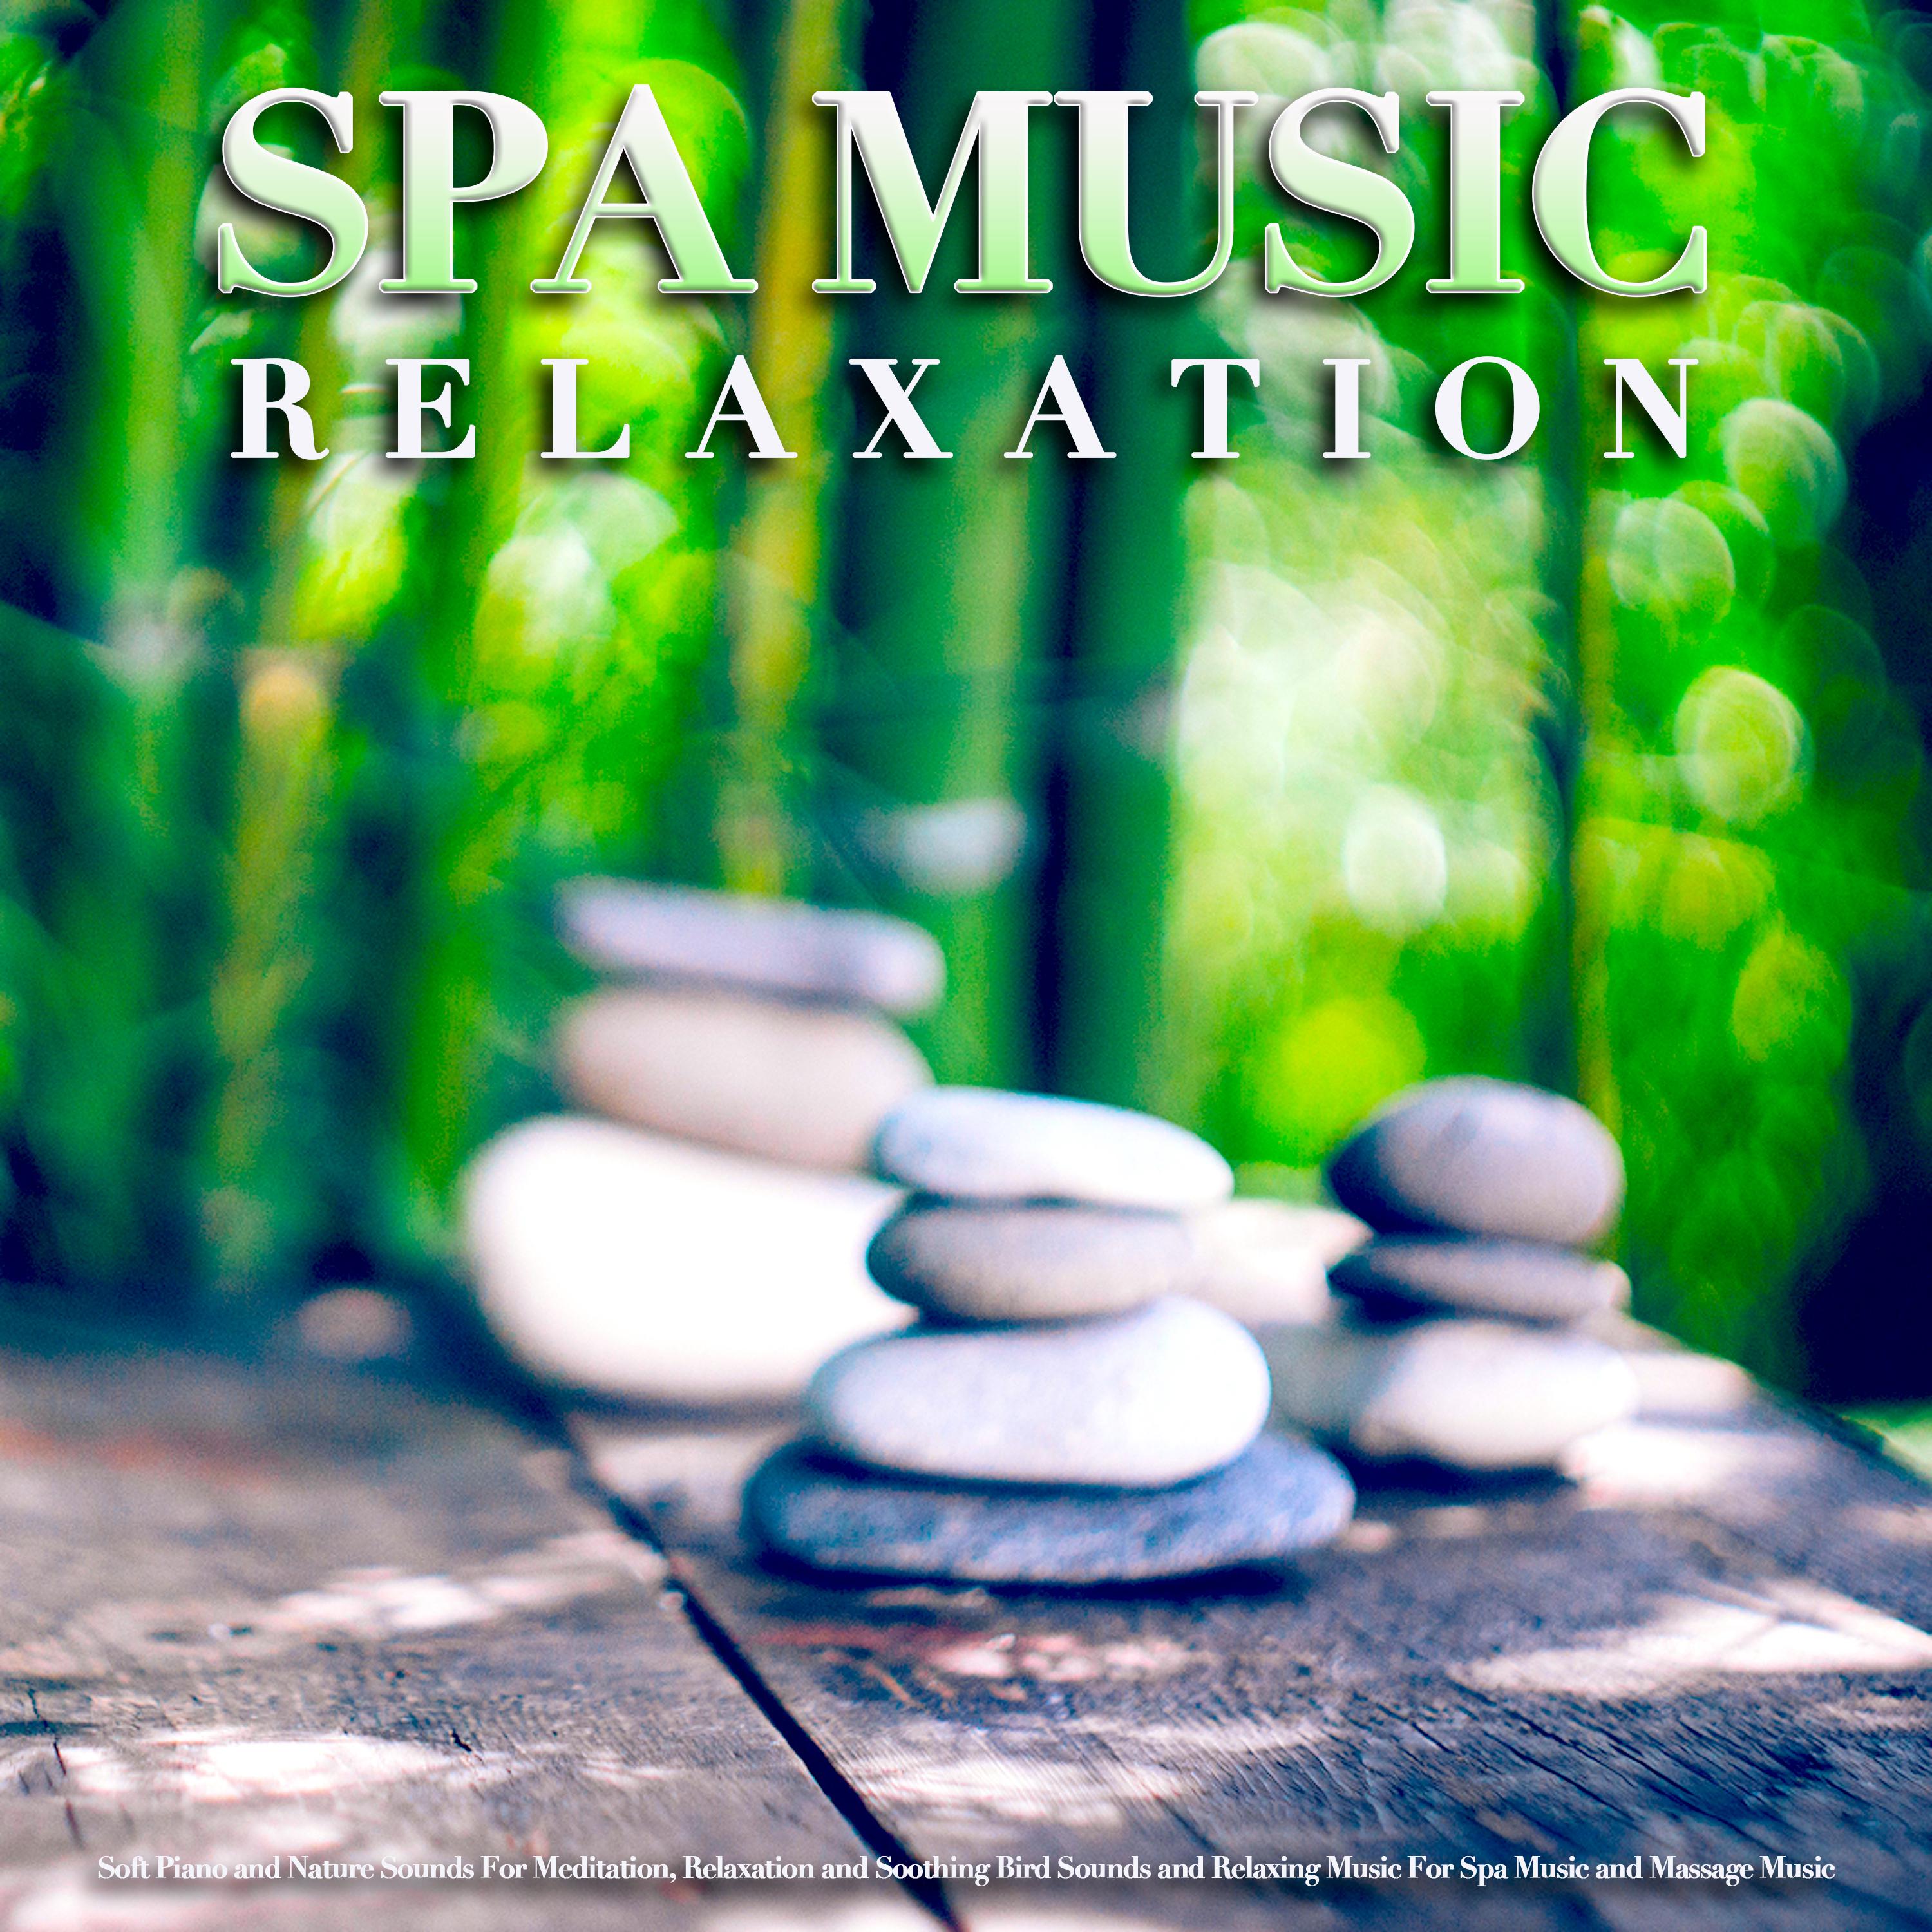 Peaceful Music and Bird Sounds For Relaxation